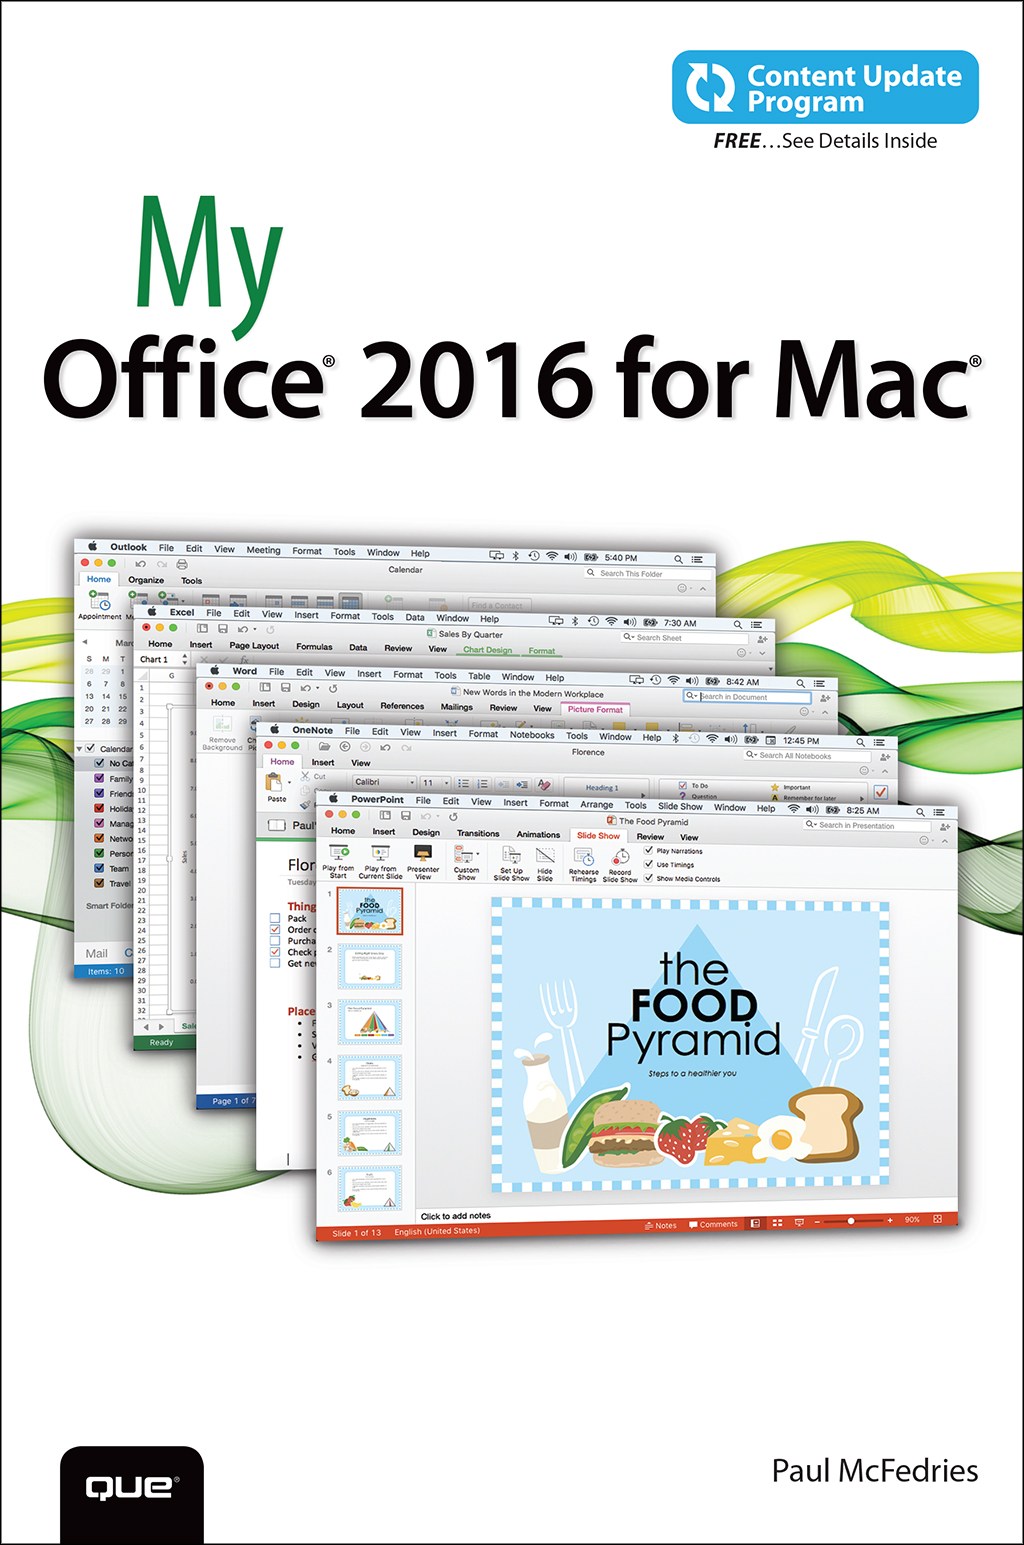 My Office 2016 for Mac